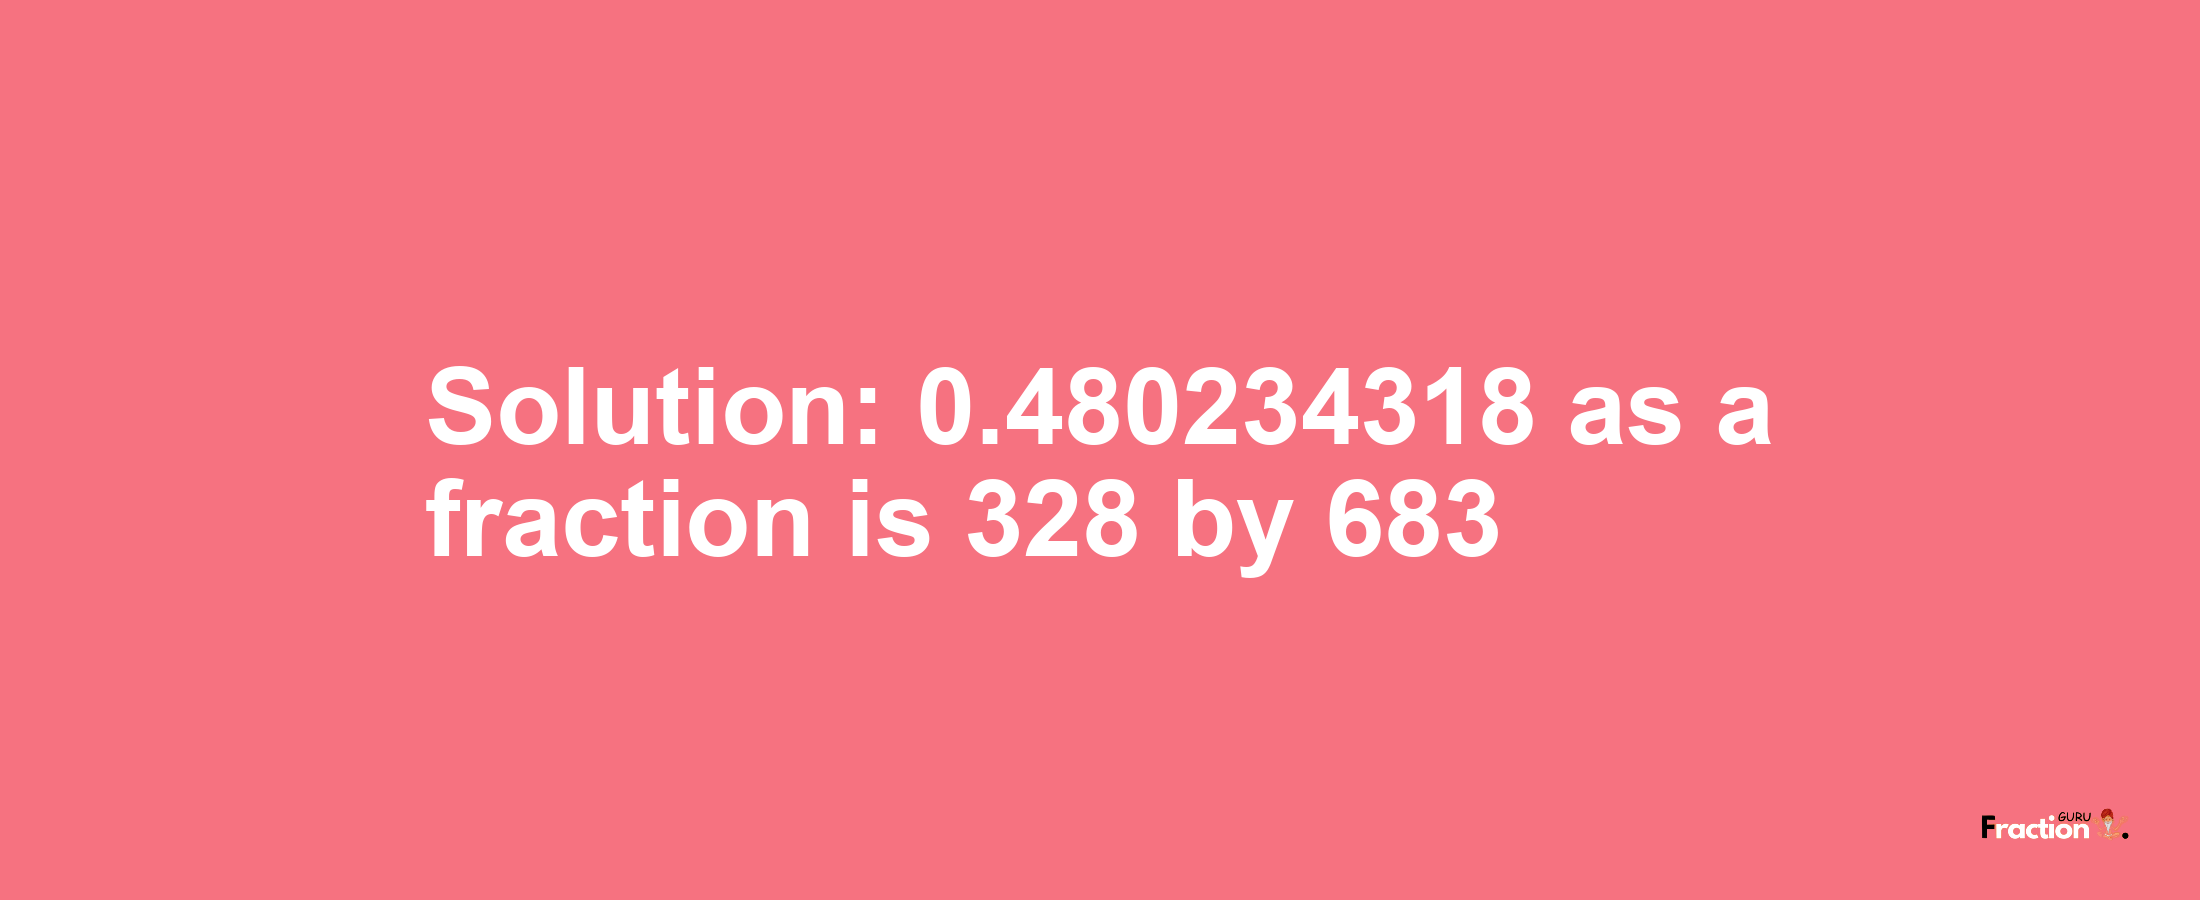 Solution:0.480234318 as a fraction is 328/683